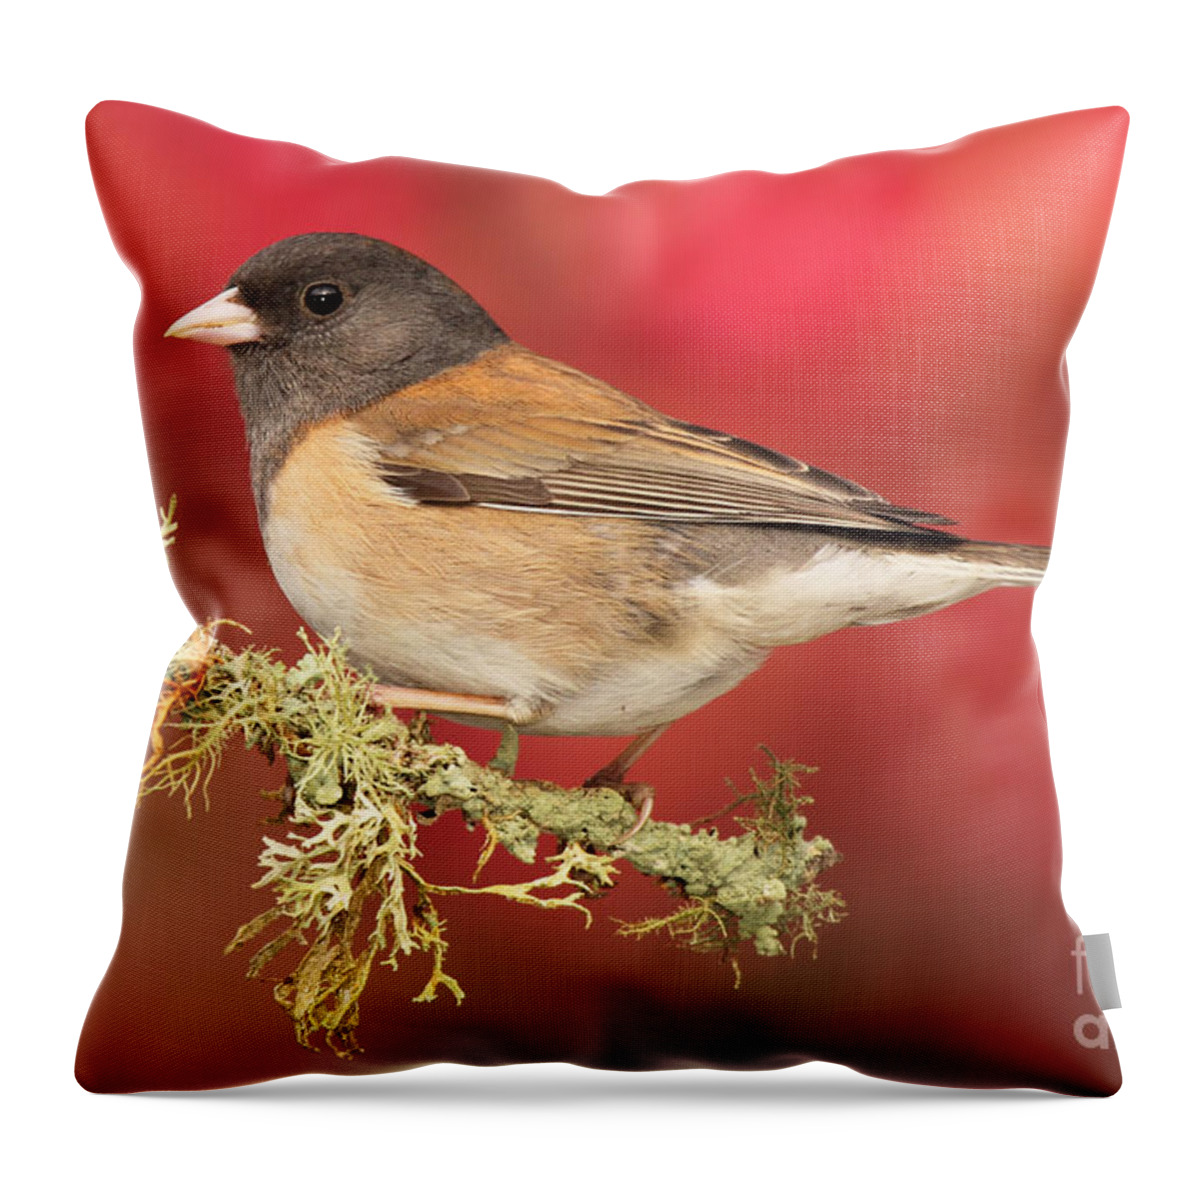 Bird Throw Pillow featuring the photograph Junco Against Peach Blossoms by Max Allen